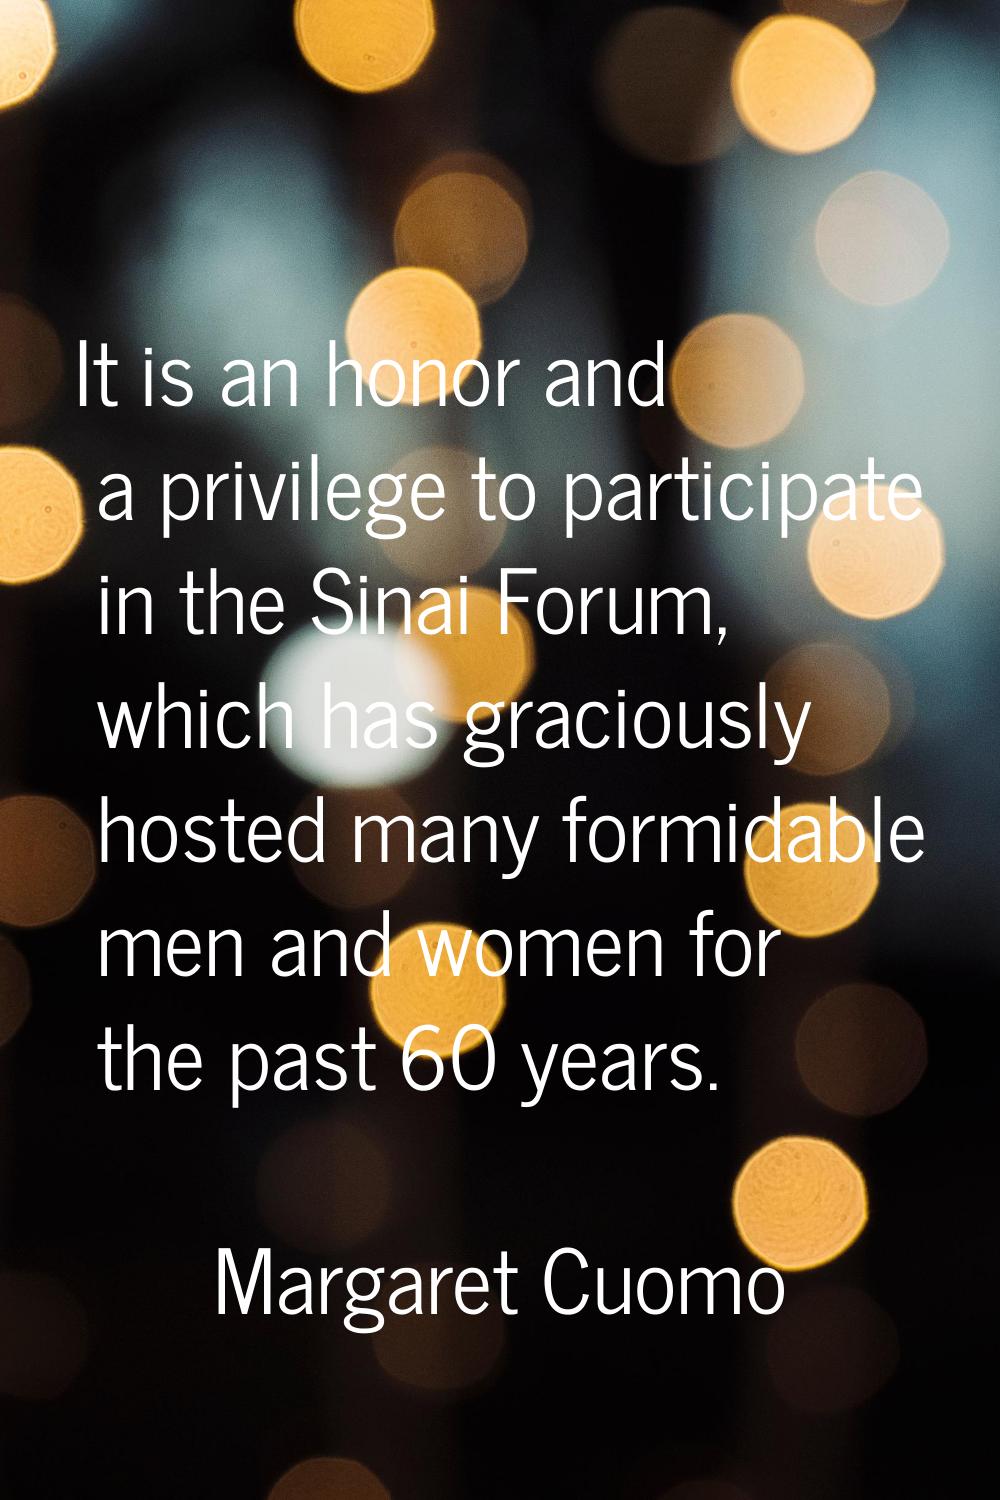 It is an honor and a privilege to participate in the Sinai Forum, which has graciously hosted many 